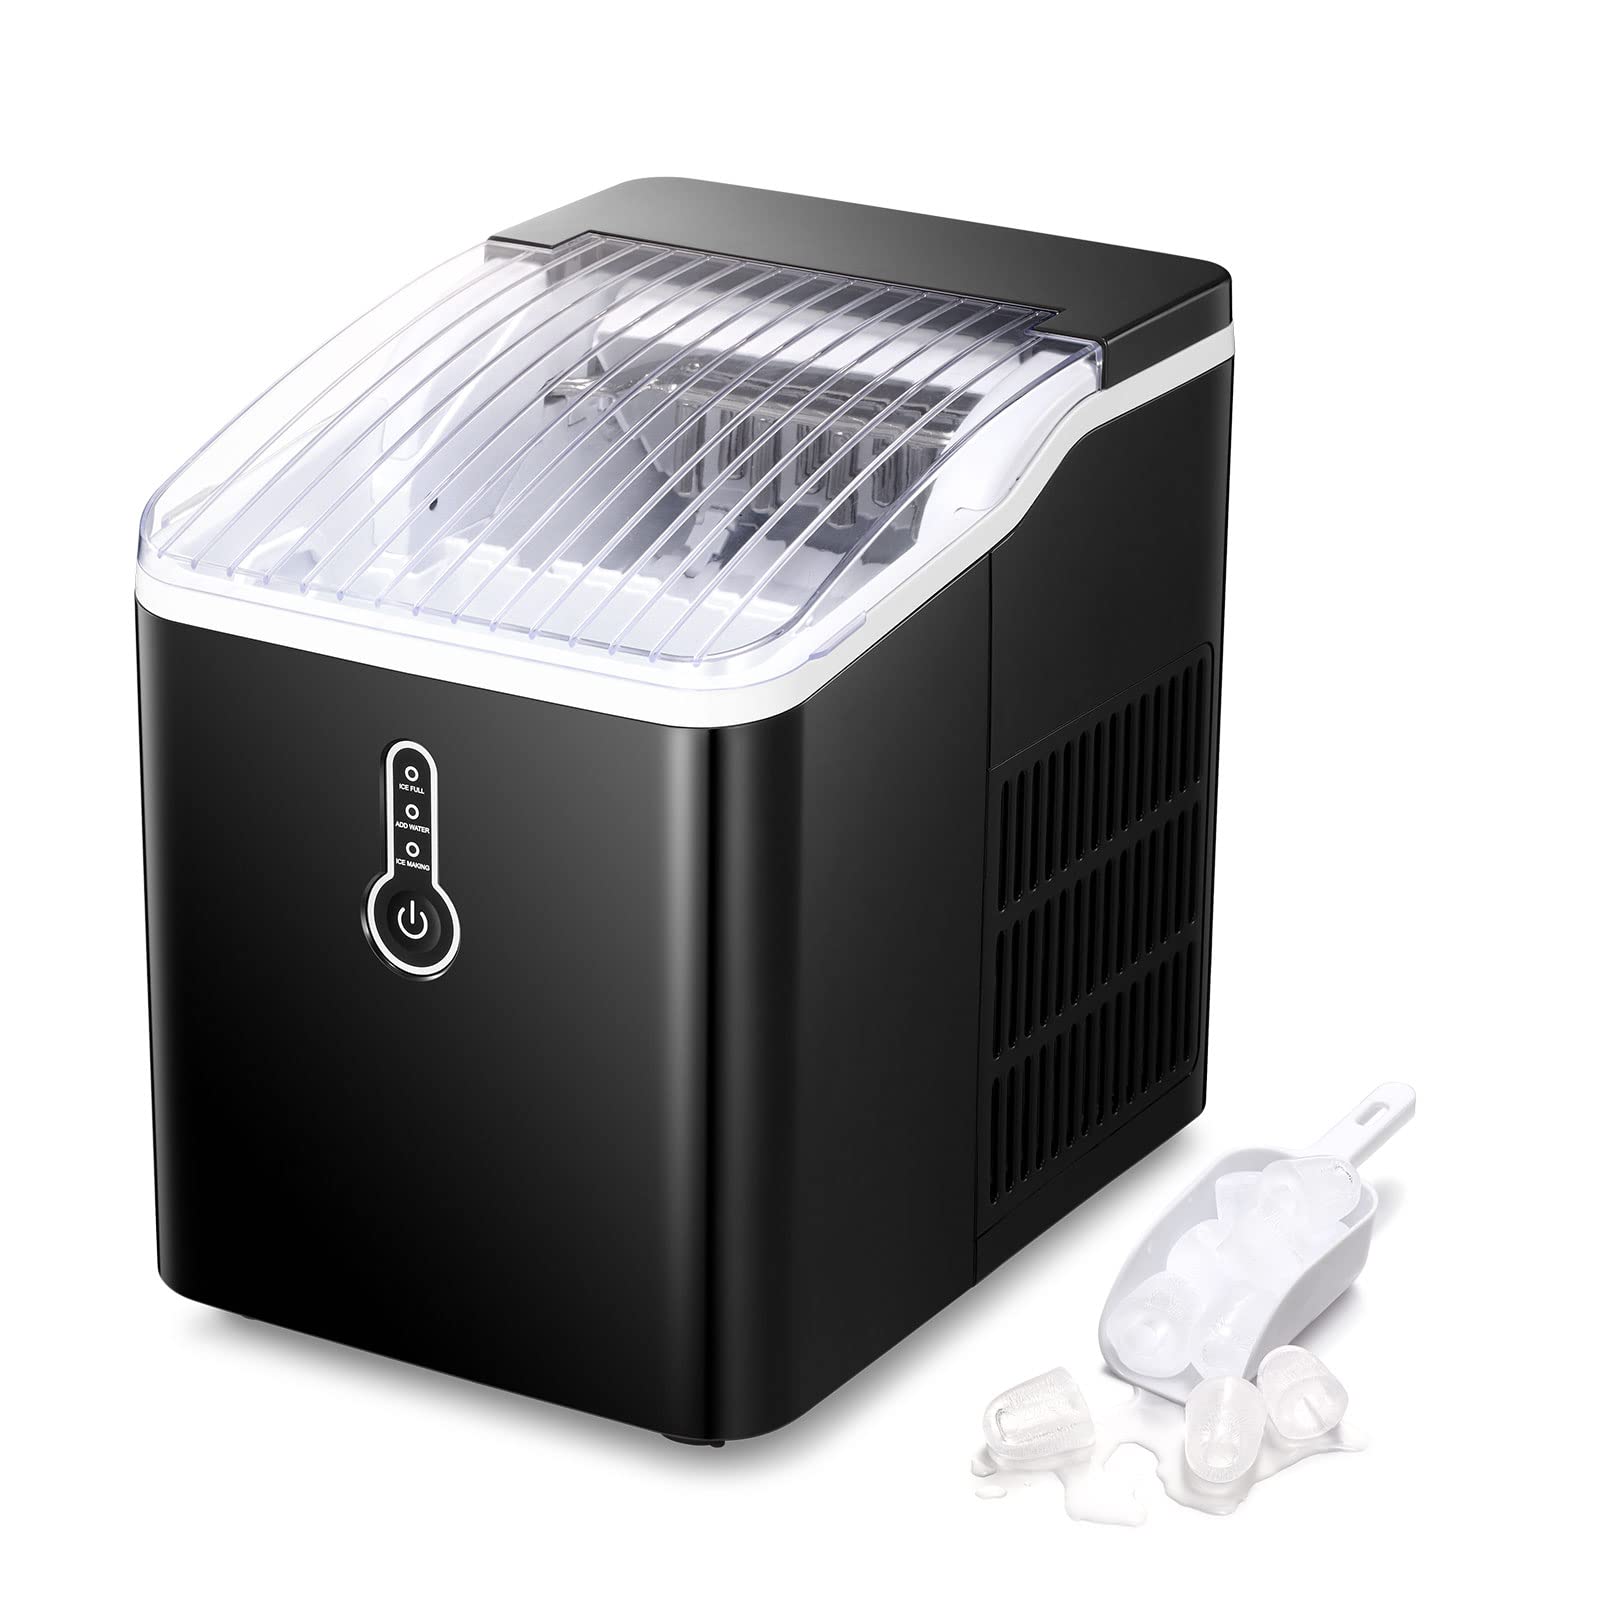 26 lbs./day Countertop Portable Ice Cube Maker in Red